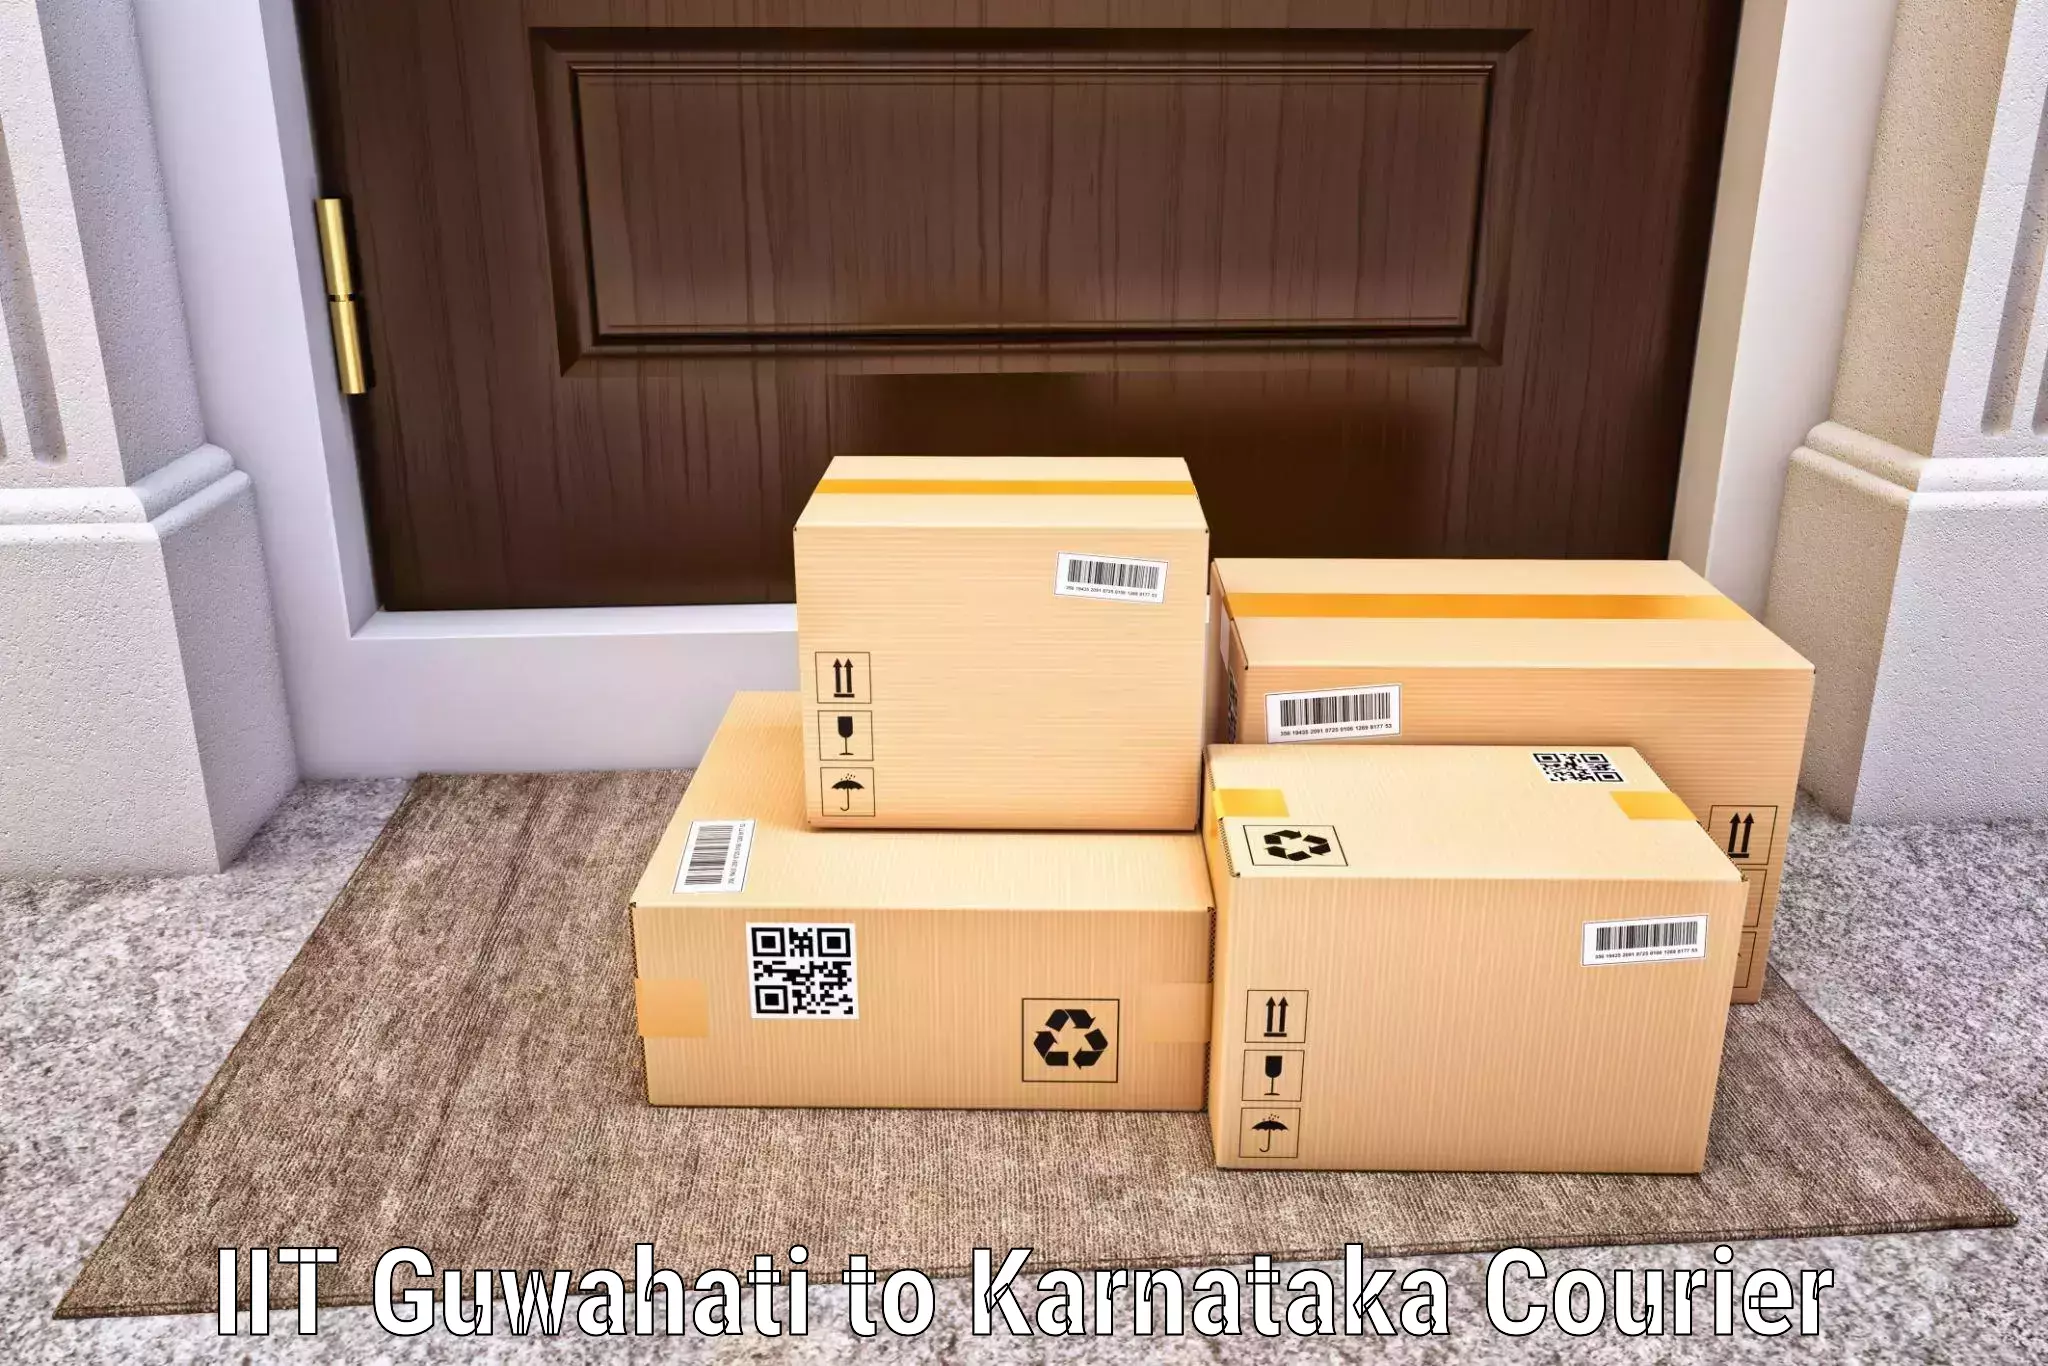 State-of-the-art courier technology IIT Guwahati to Mangalore Port